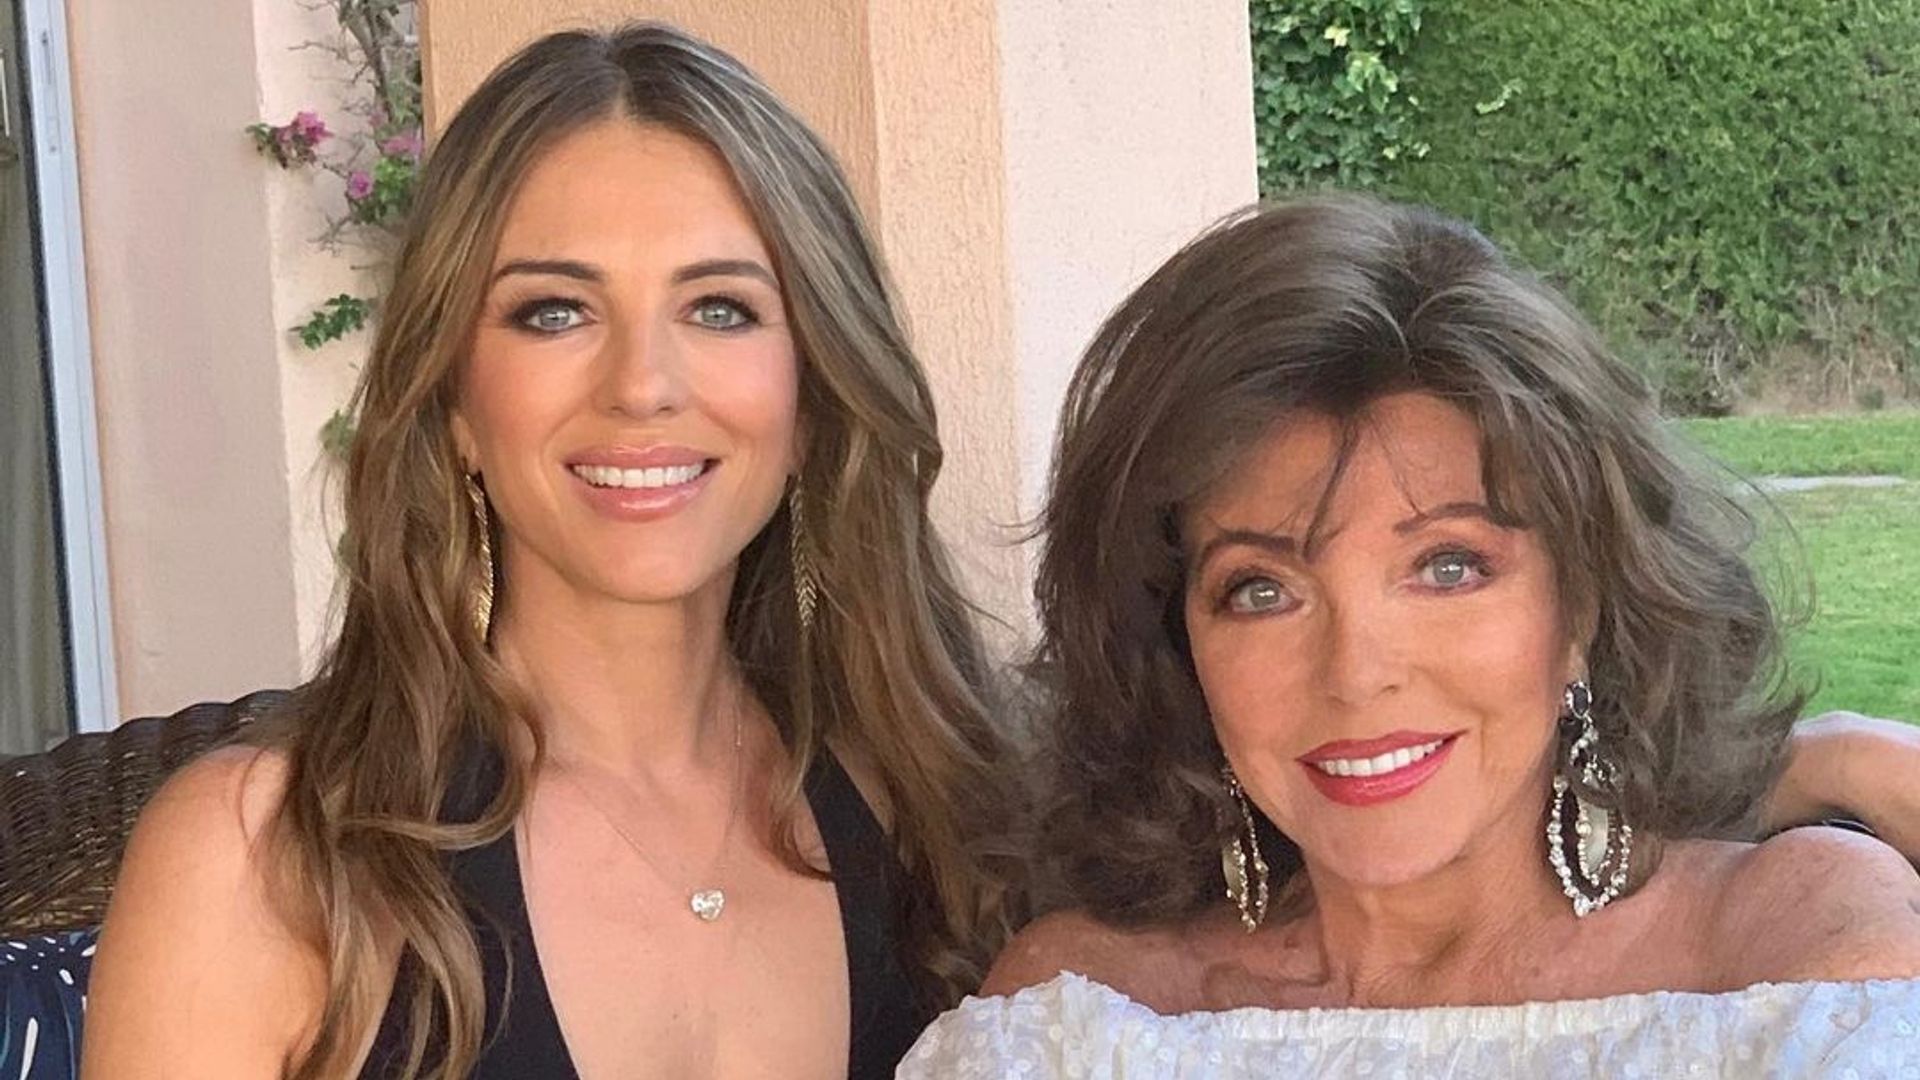 Elizabeth Hurley and Joan Collins together in St. Tropez